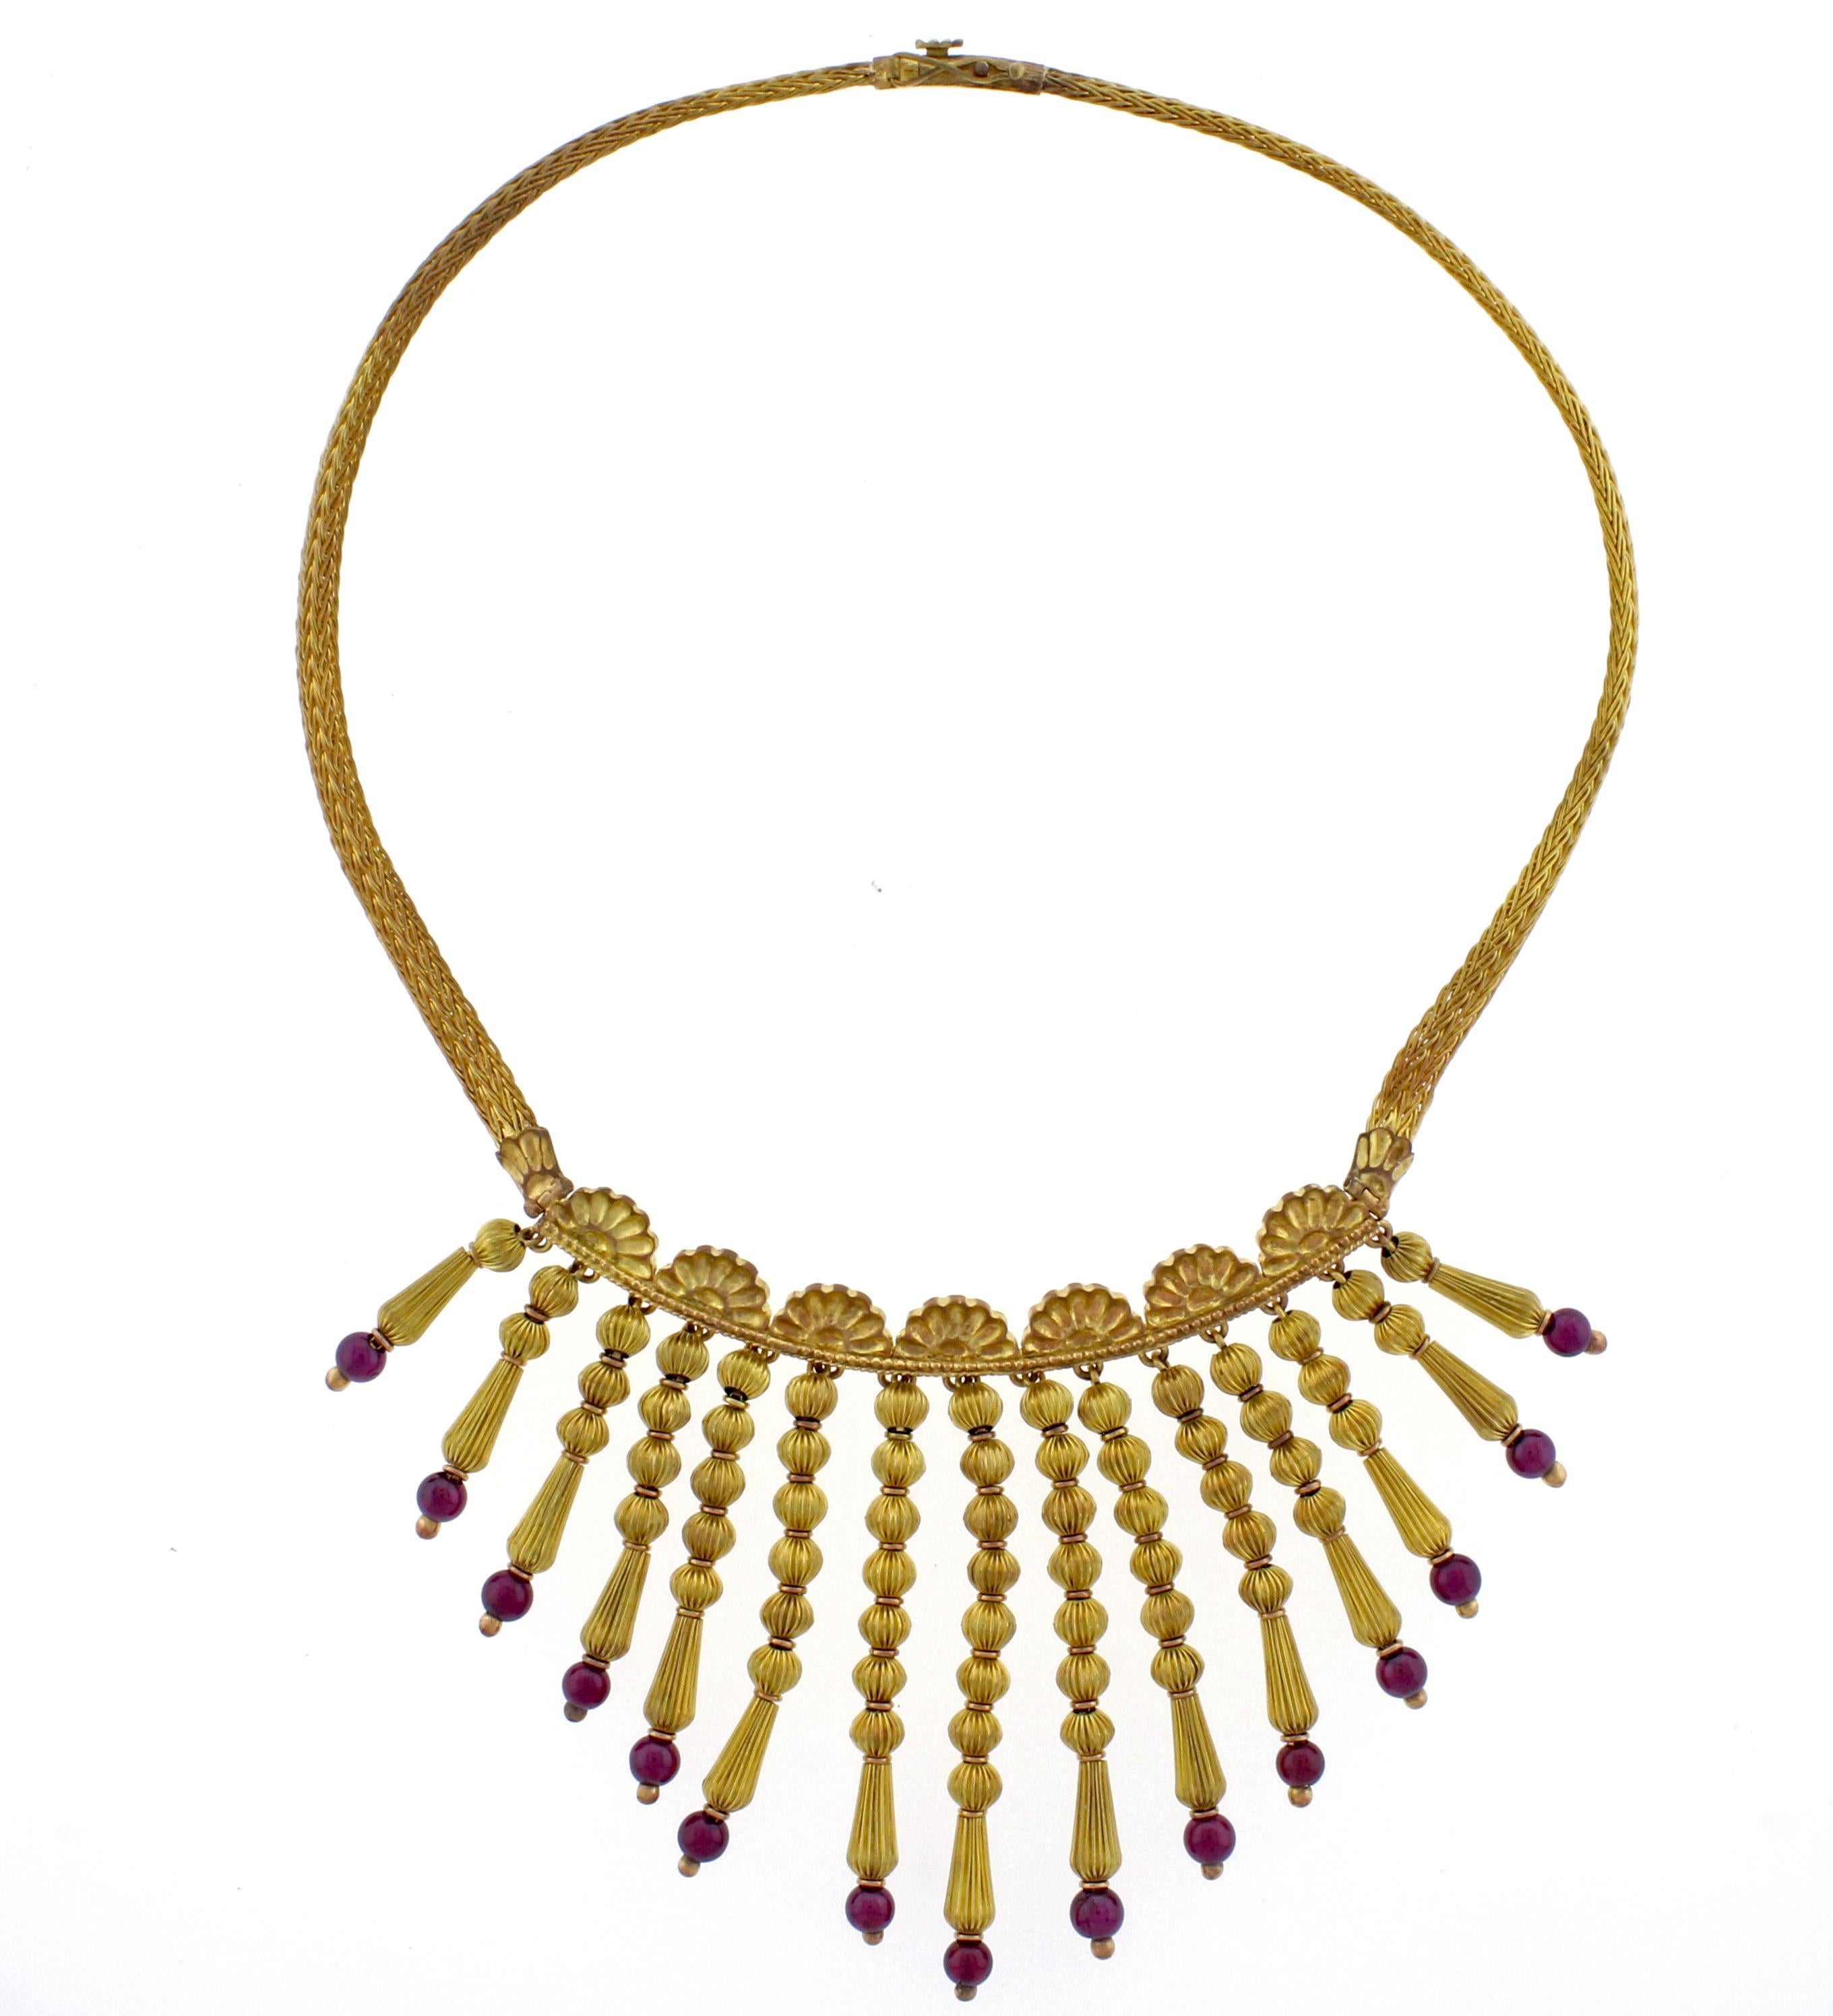 From acclaimed Greek  jeweler  Ilias Lalaounis, this dramatic tassel necklace. The 18 karat gold necklace is comprised of 15 tassels graduating  from 1 to 2¼ inches and terminating with a garnet bead.  70.5 grams, 16 inches   